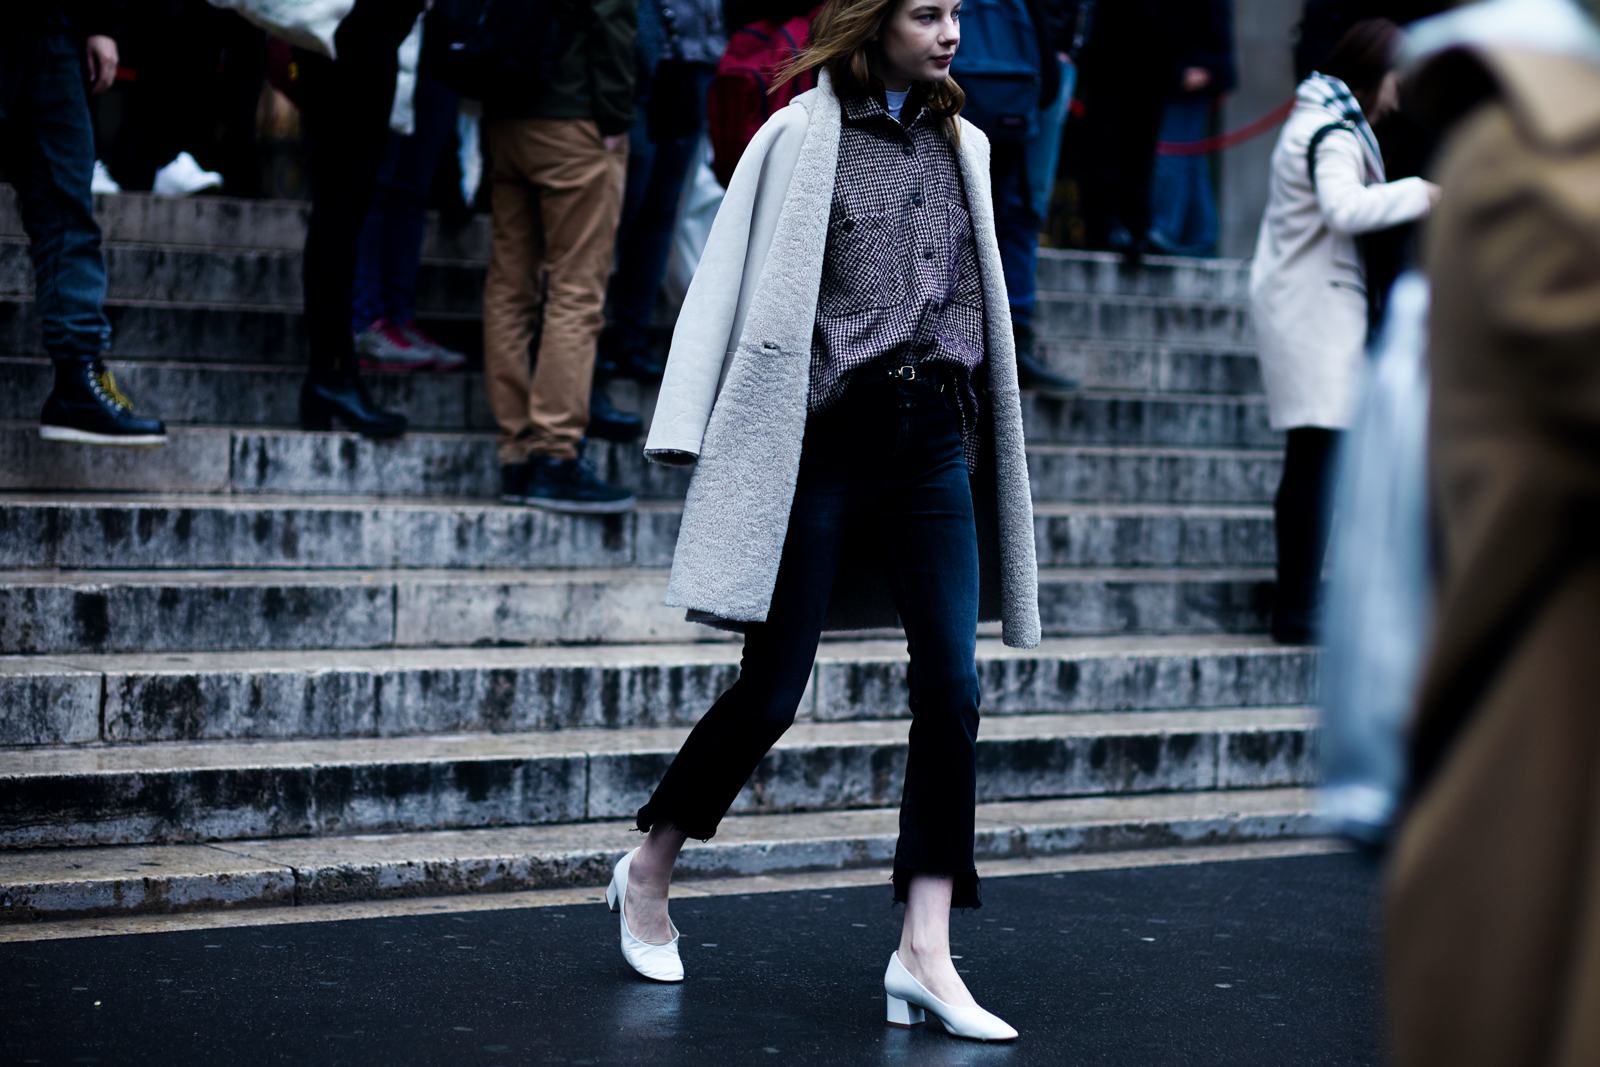 PFW Street Style: Model Michelle Meinert wearing black jeans and white shearling coat before the Stella McCartney Fall 2016 fashion show in Paris, France